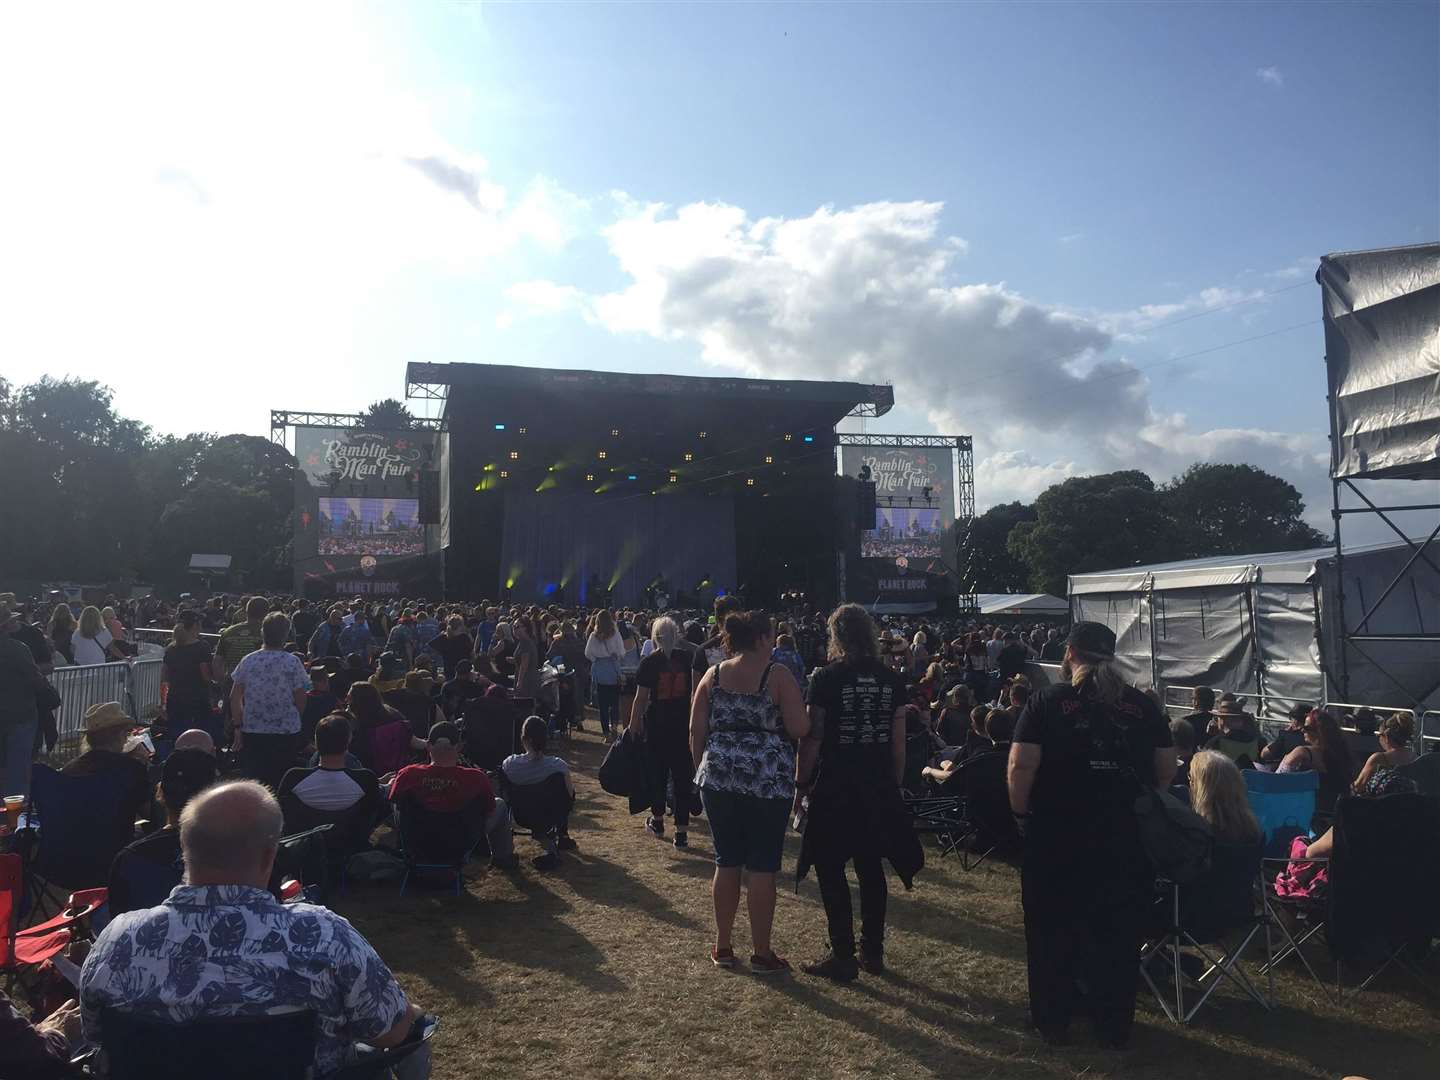 It was perfect festival weather at Mote Park yesterday